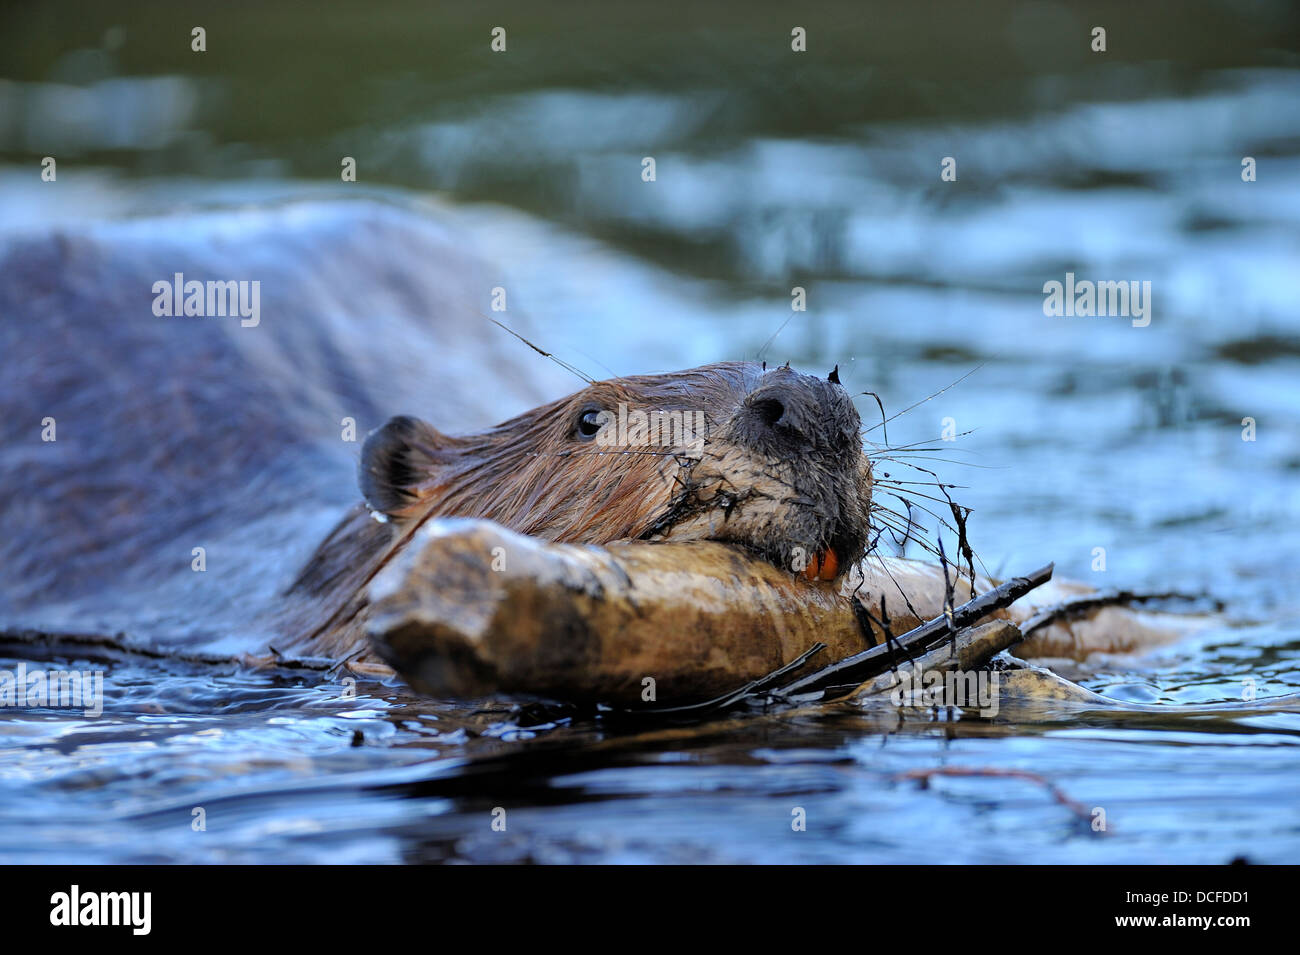 A wild beaver 'Castor canadensis' swimming carrying a stick in his mouth Stock Photo